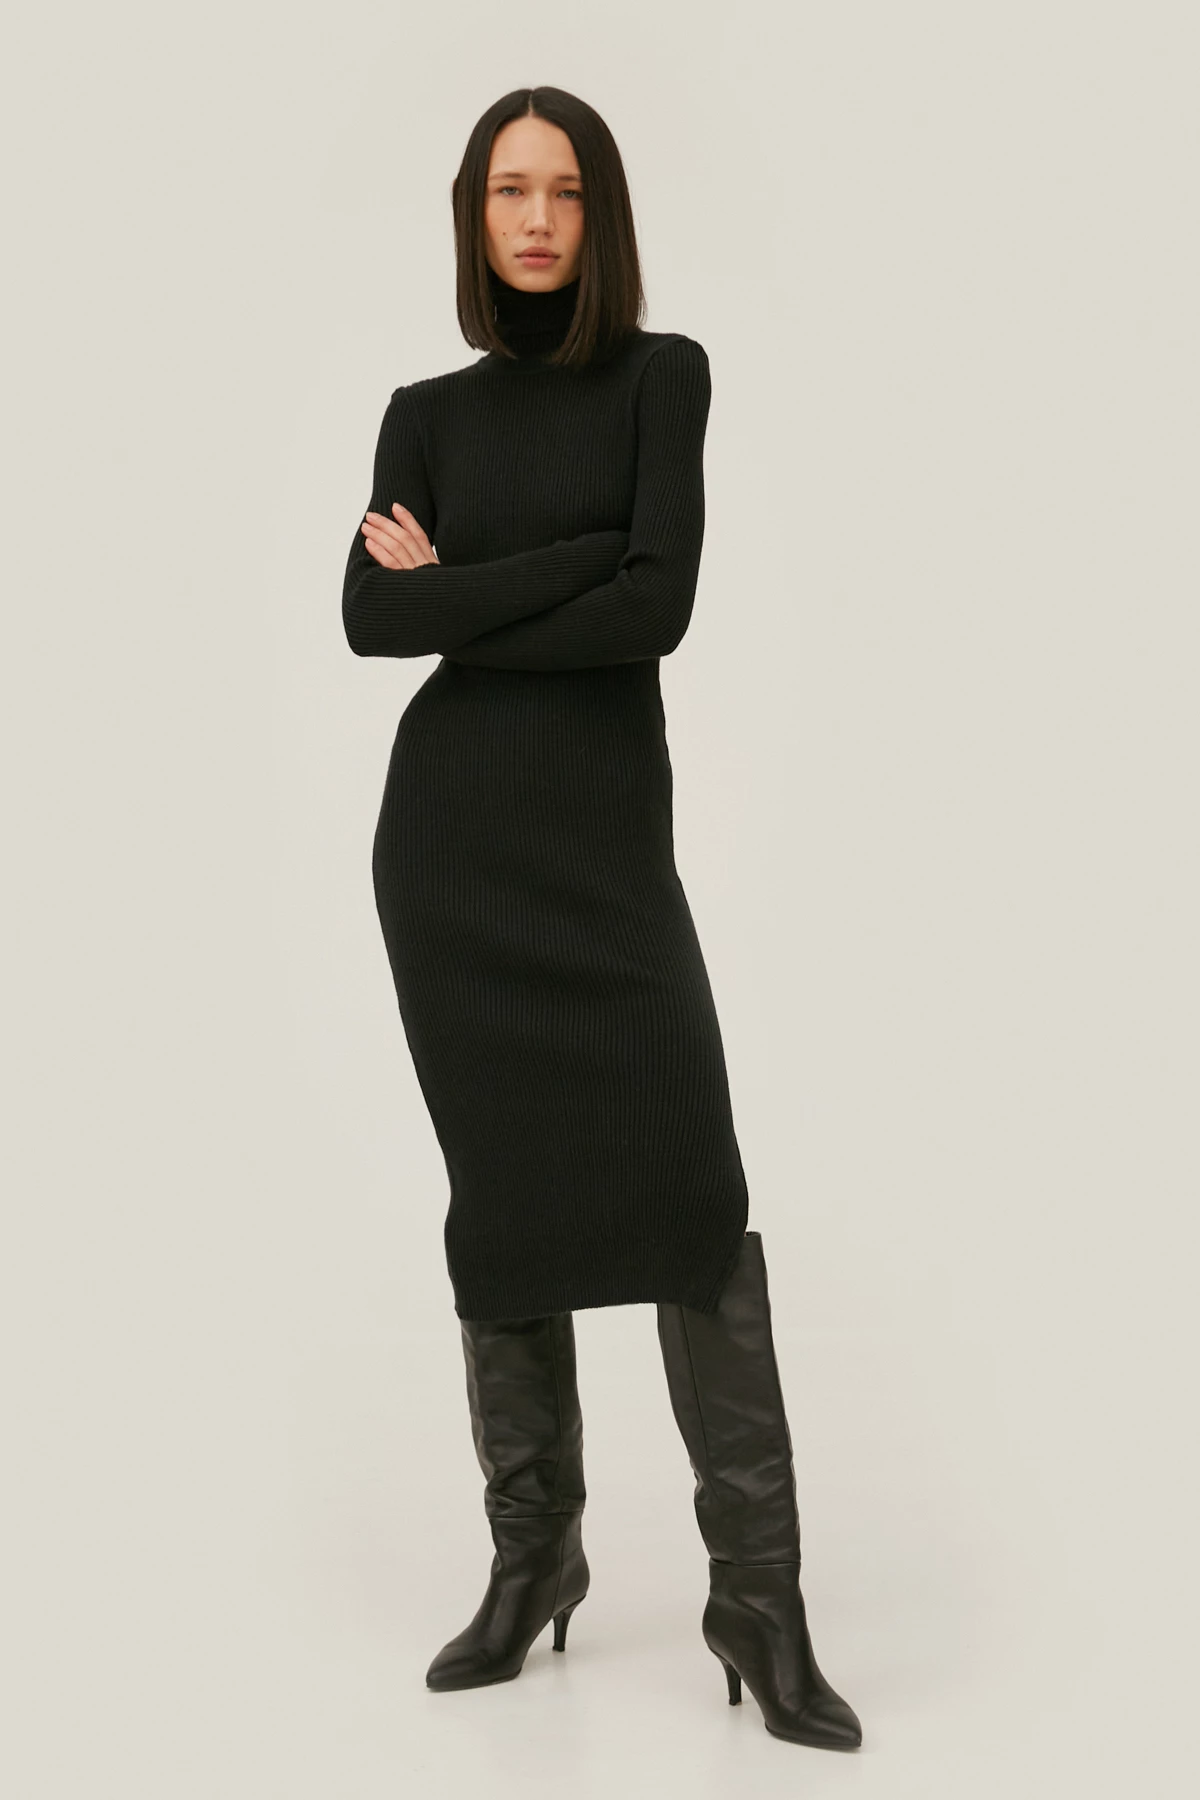 Knitted black dress with neckline and viscose, photo 2